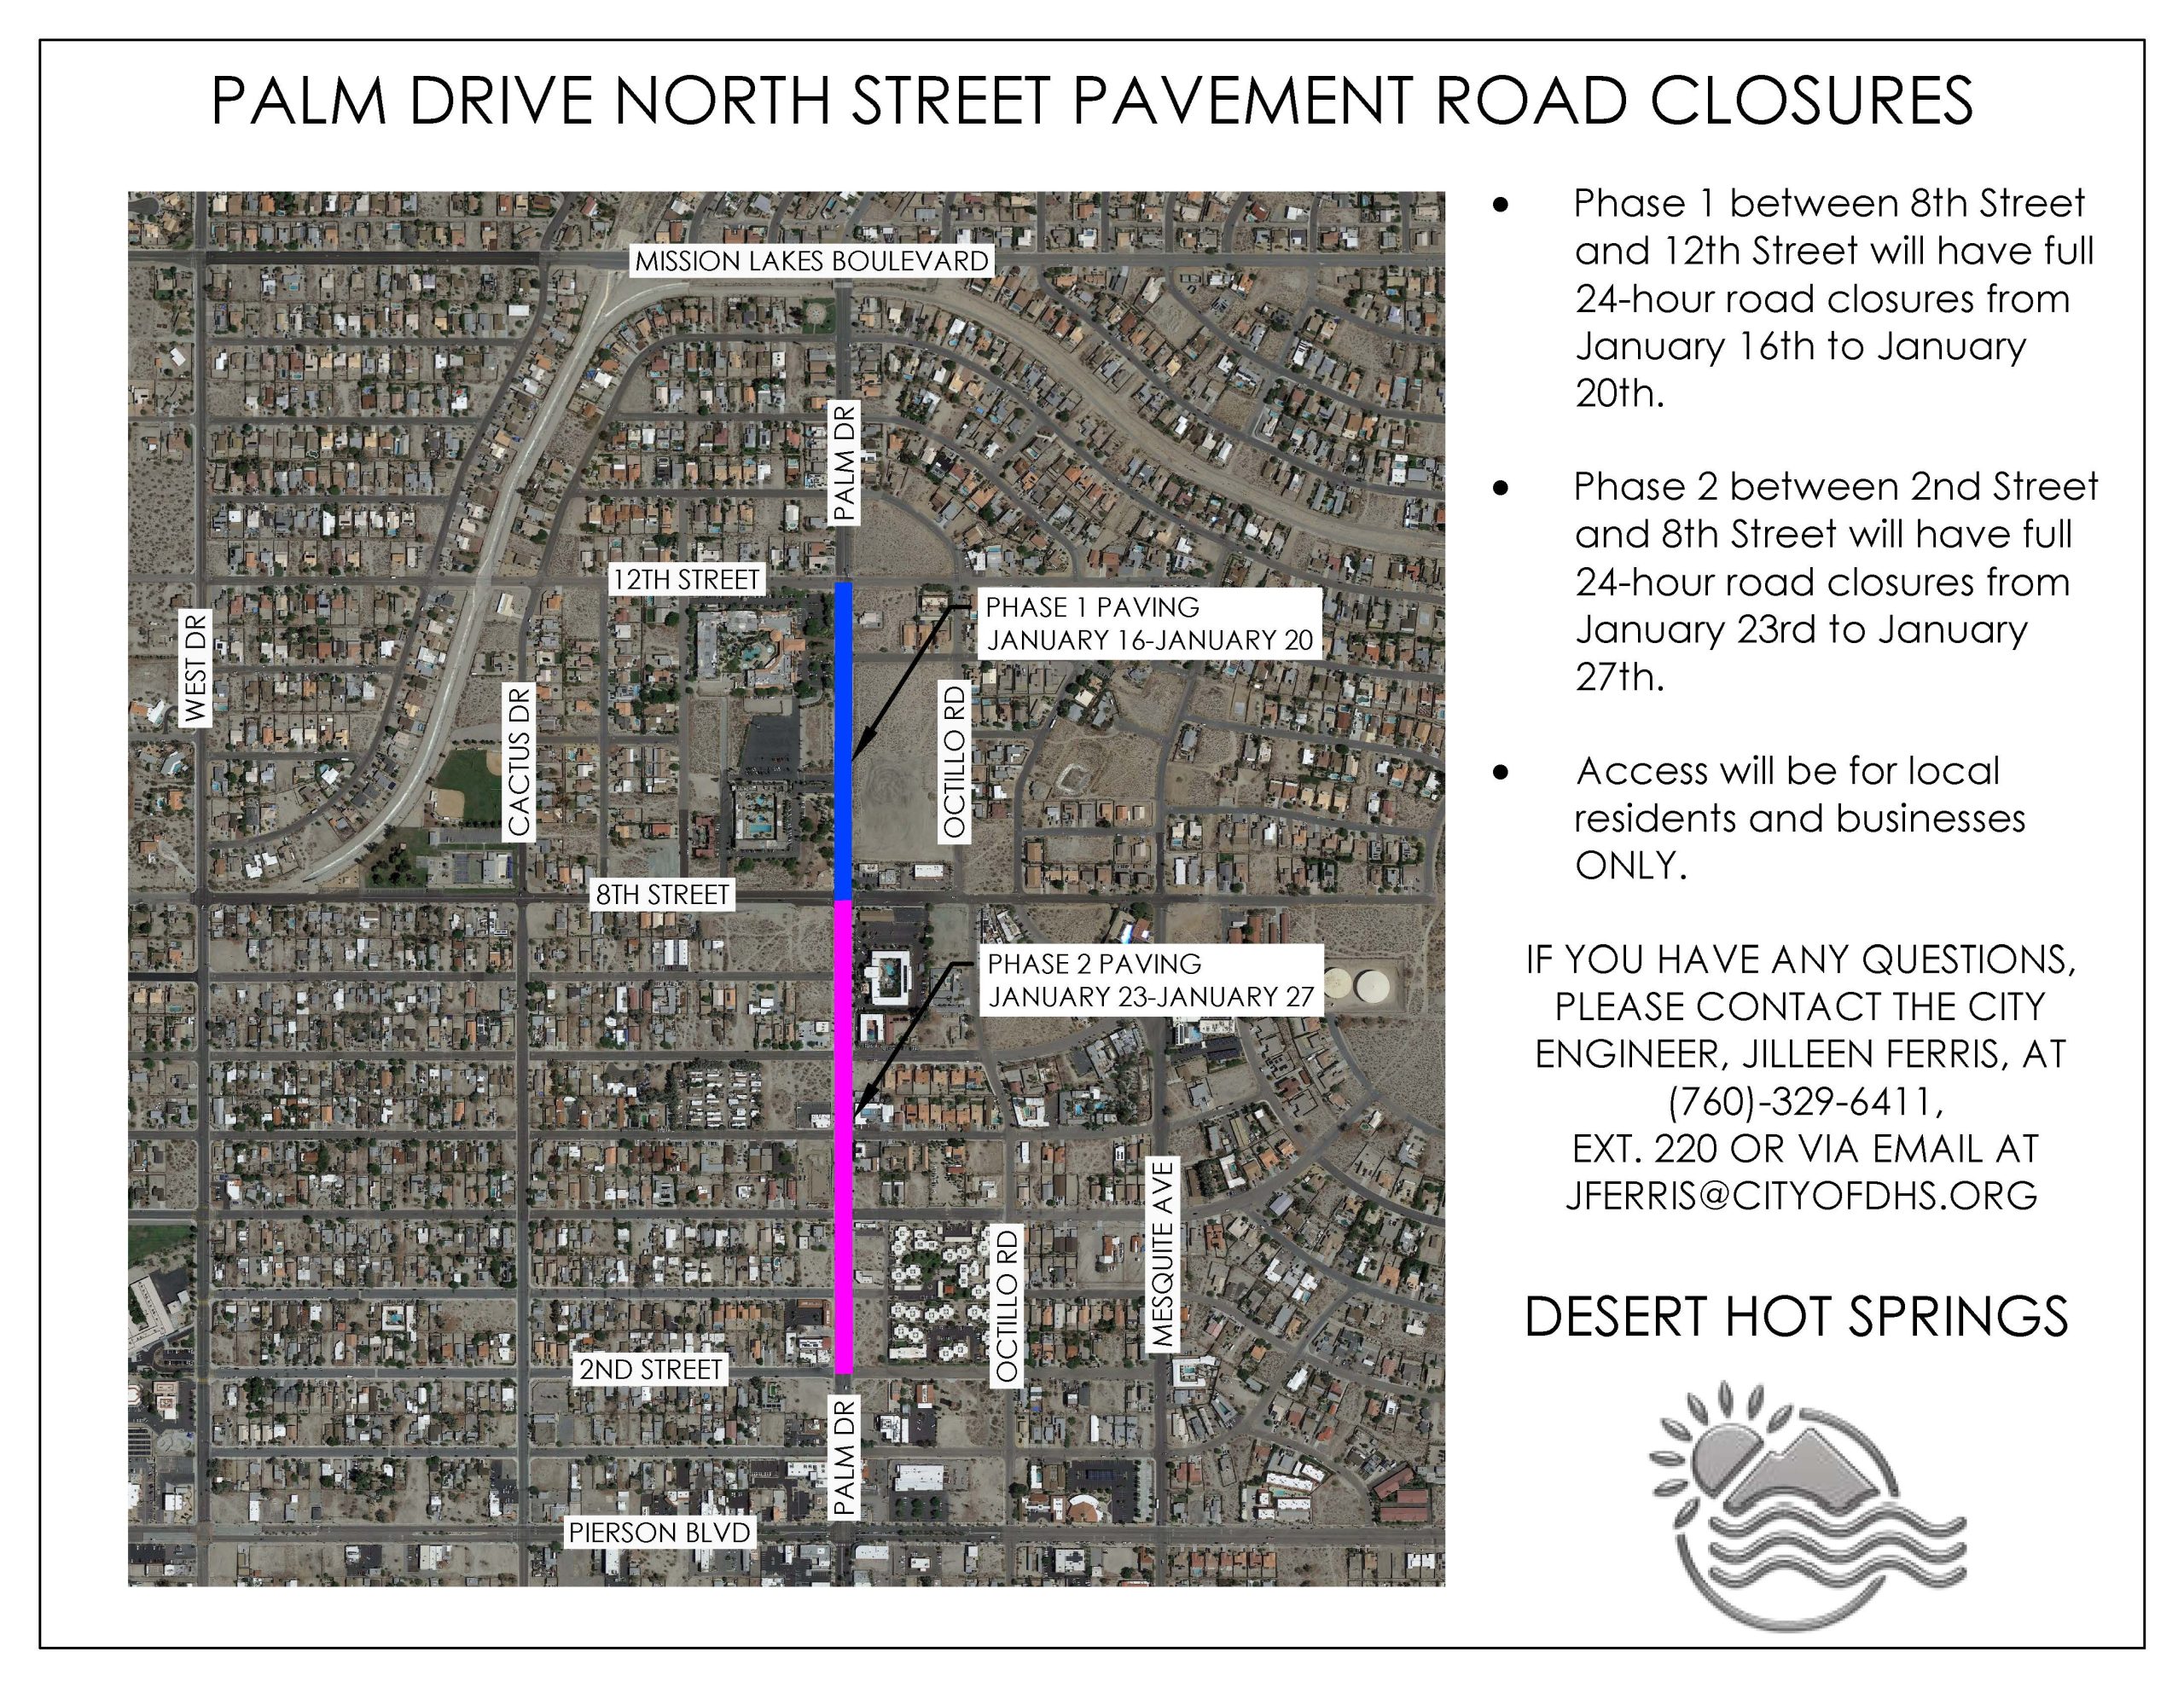 Palm Drive North Street Pavement Road Closures Scaled 